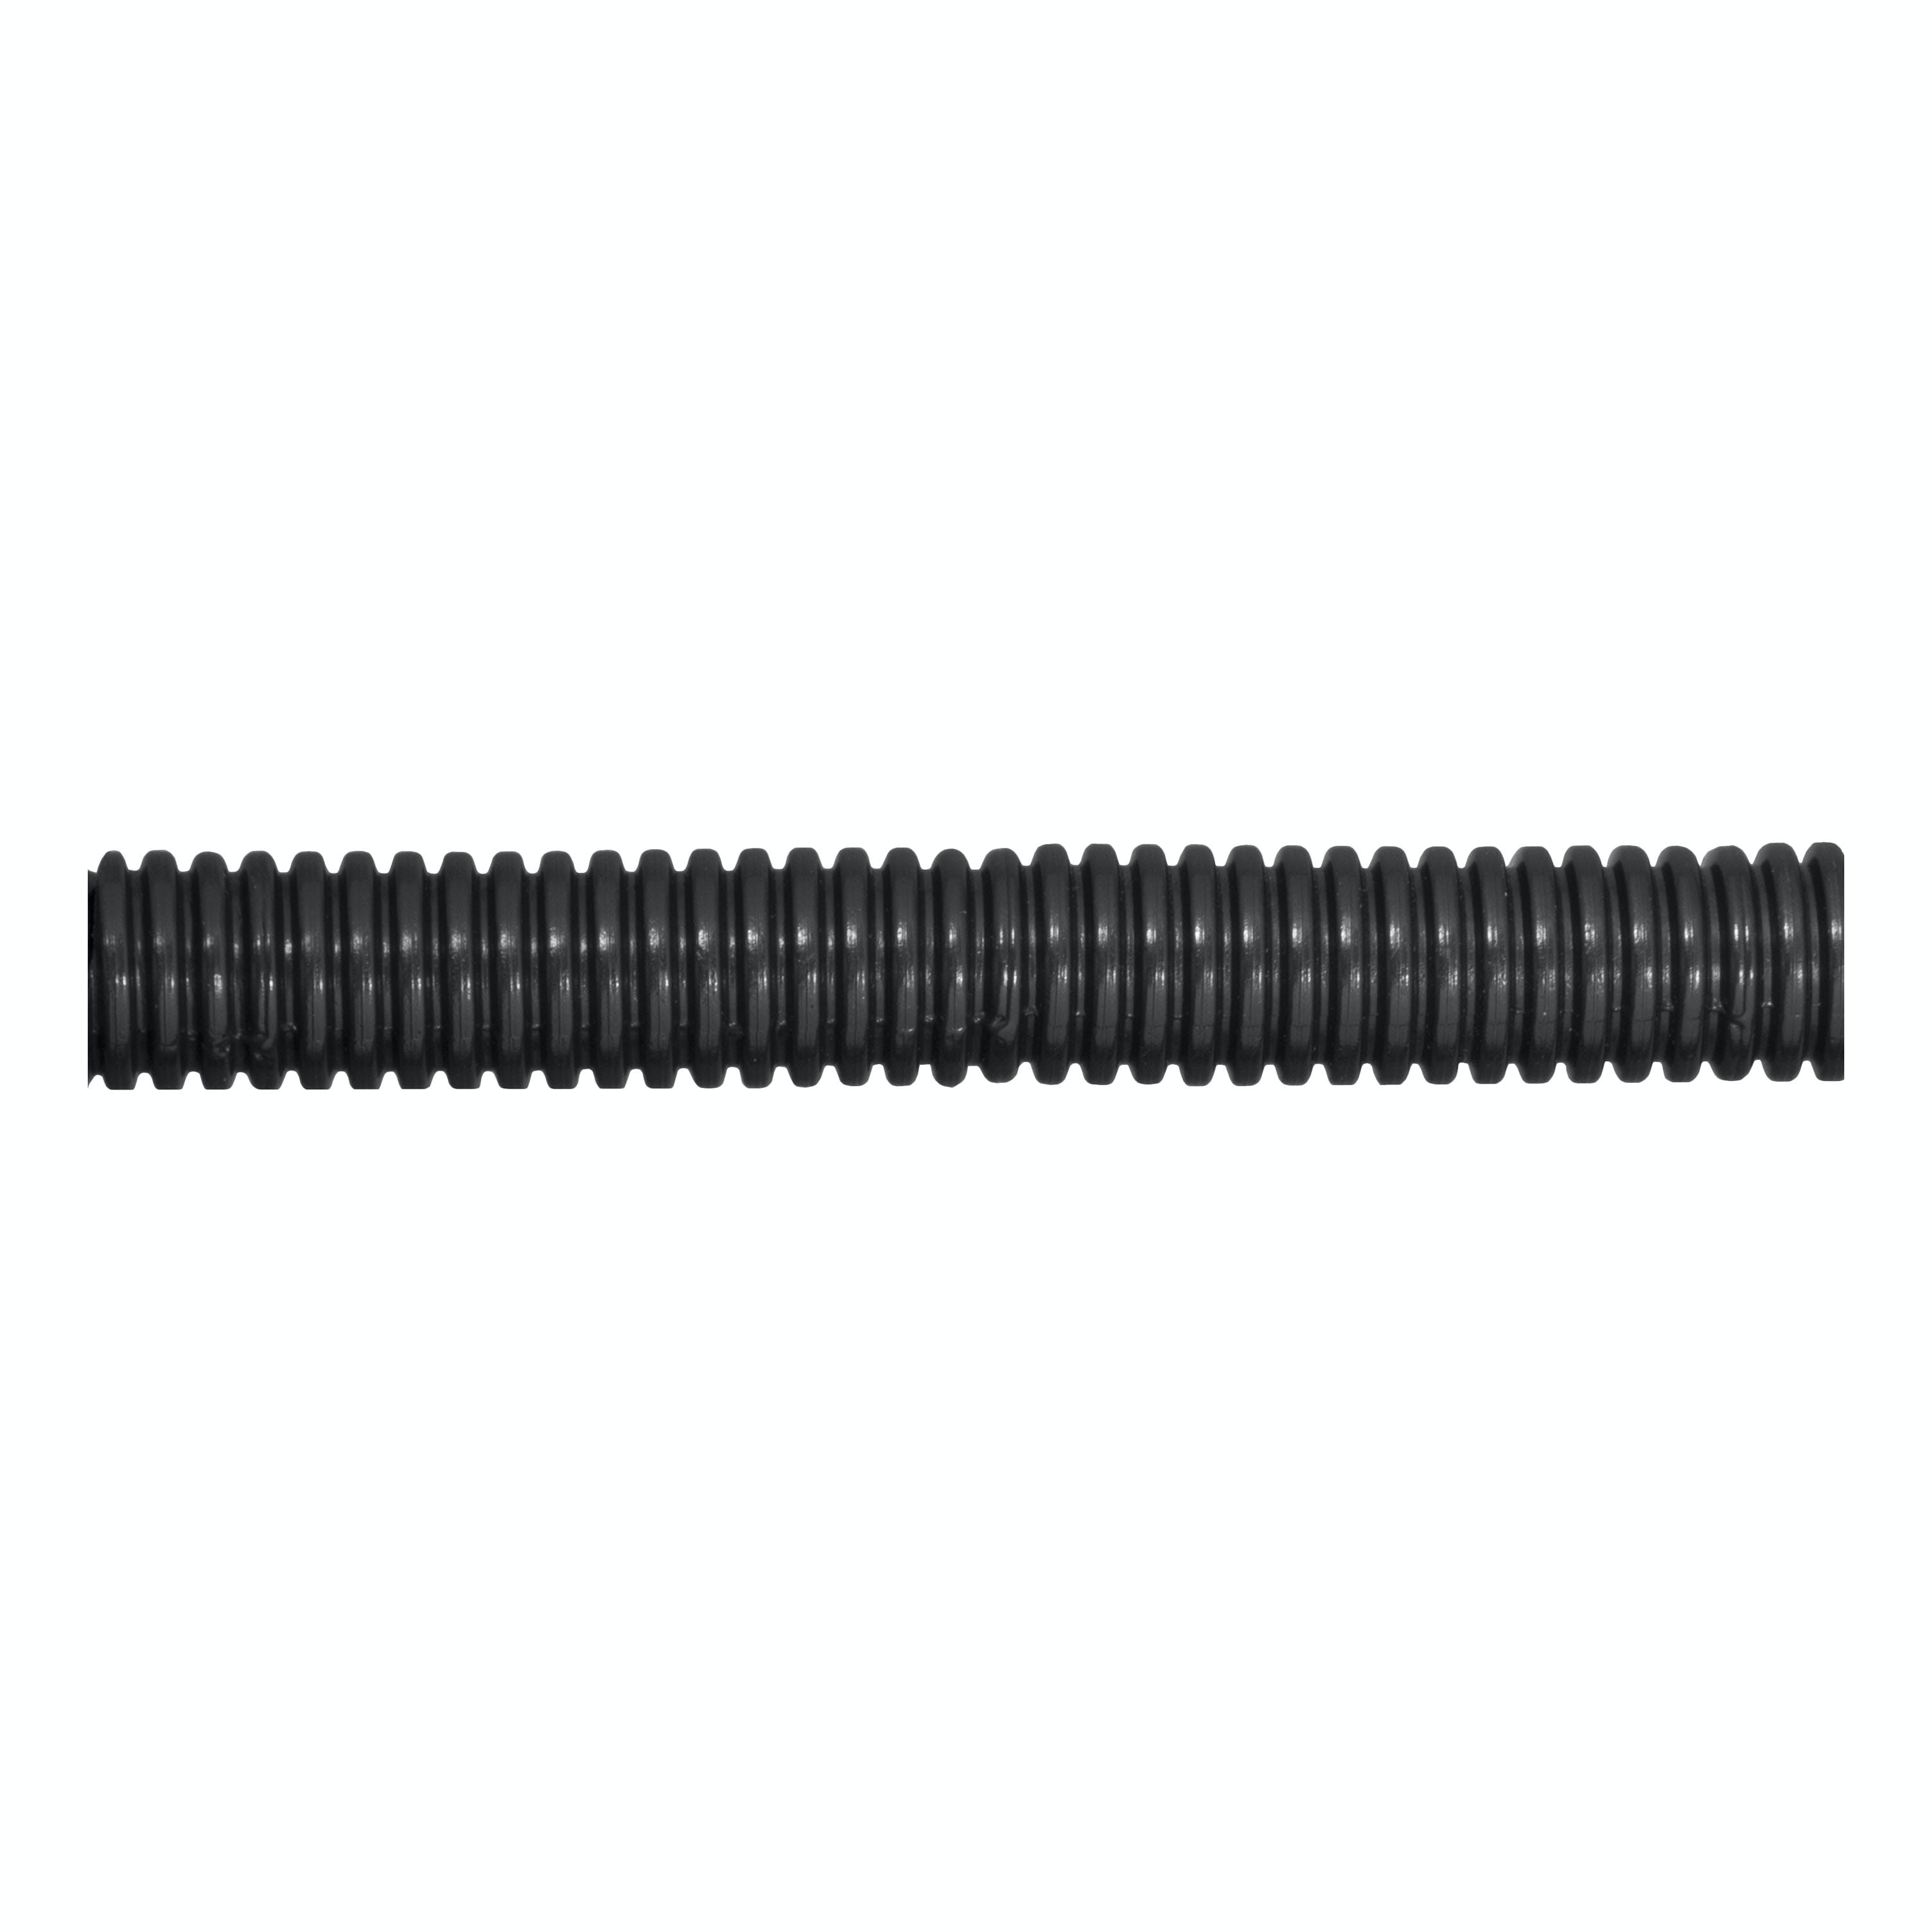 CURT 59827 1/2 x 25' Convoluted Slit Loom Tubing (Packaged)